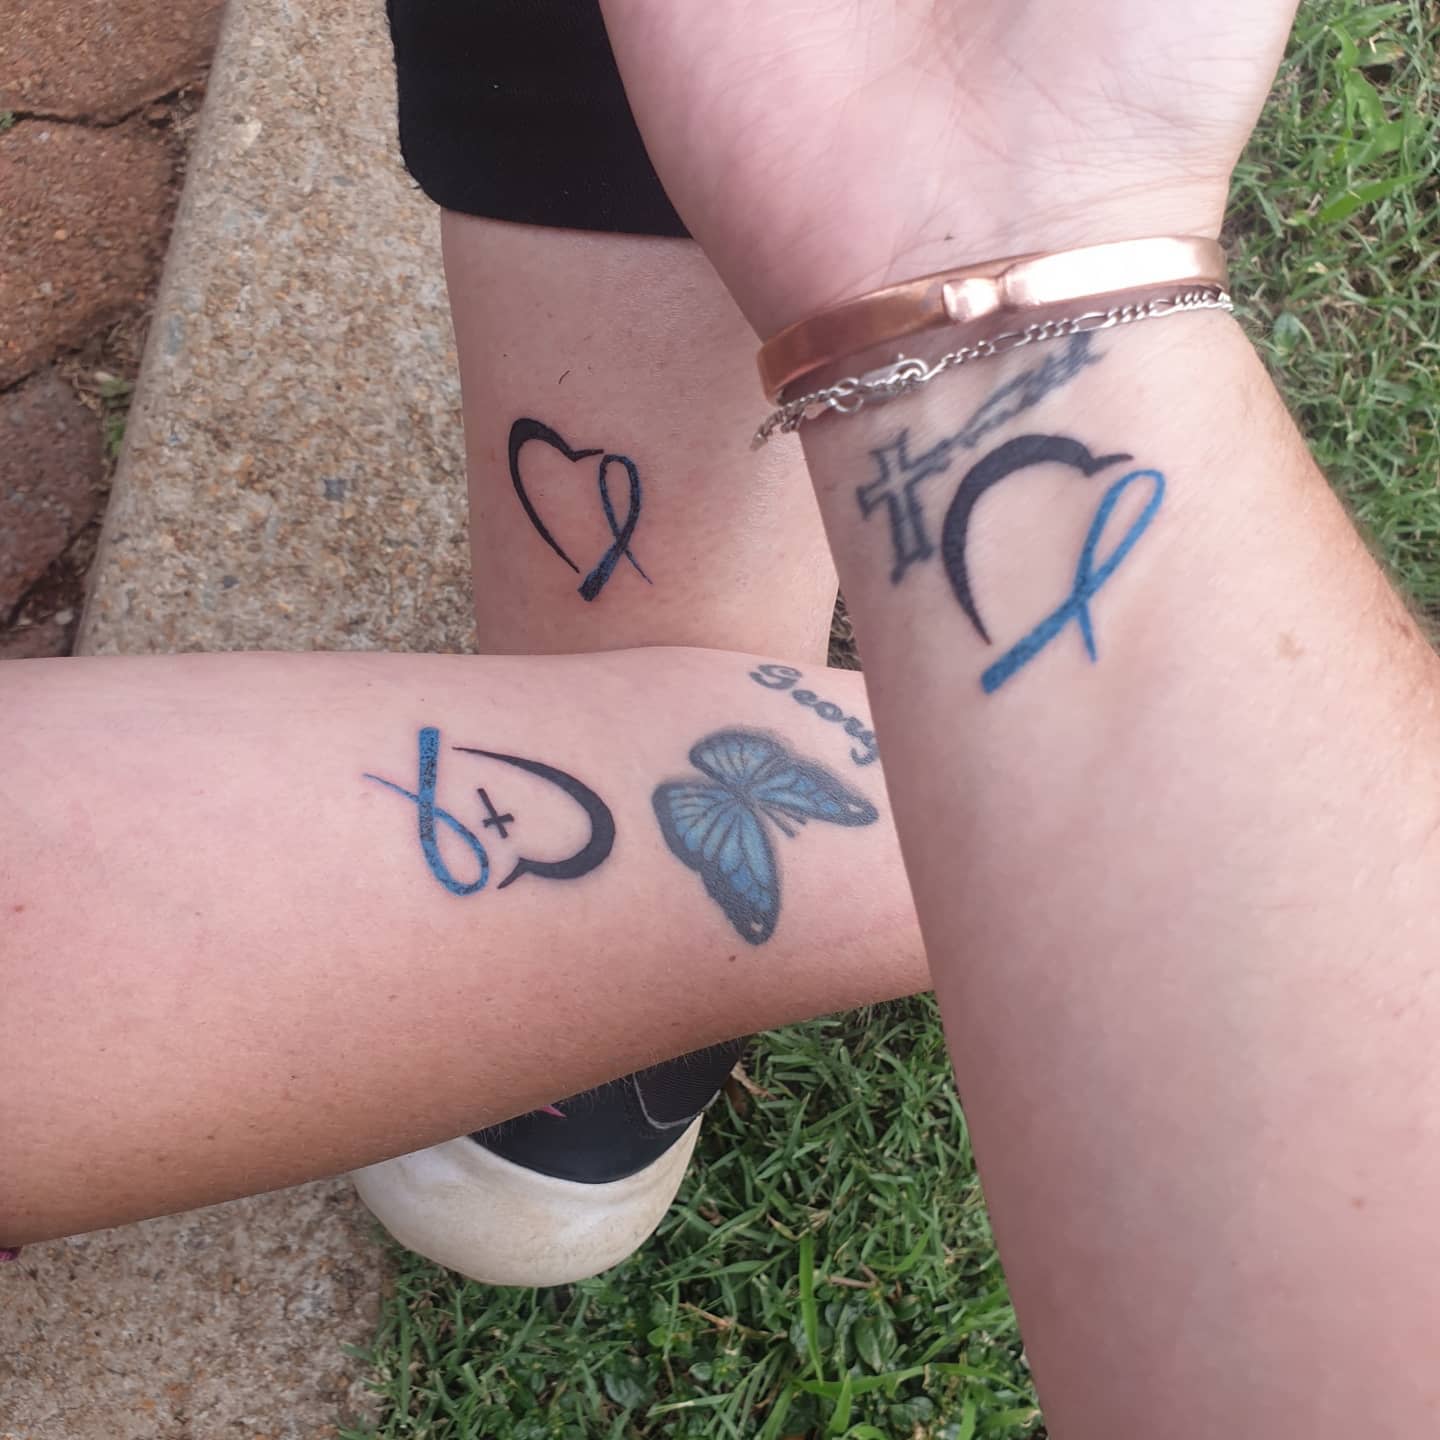 21 Tattoos People Got After Surviving a Suicide Attempt